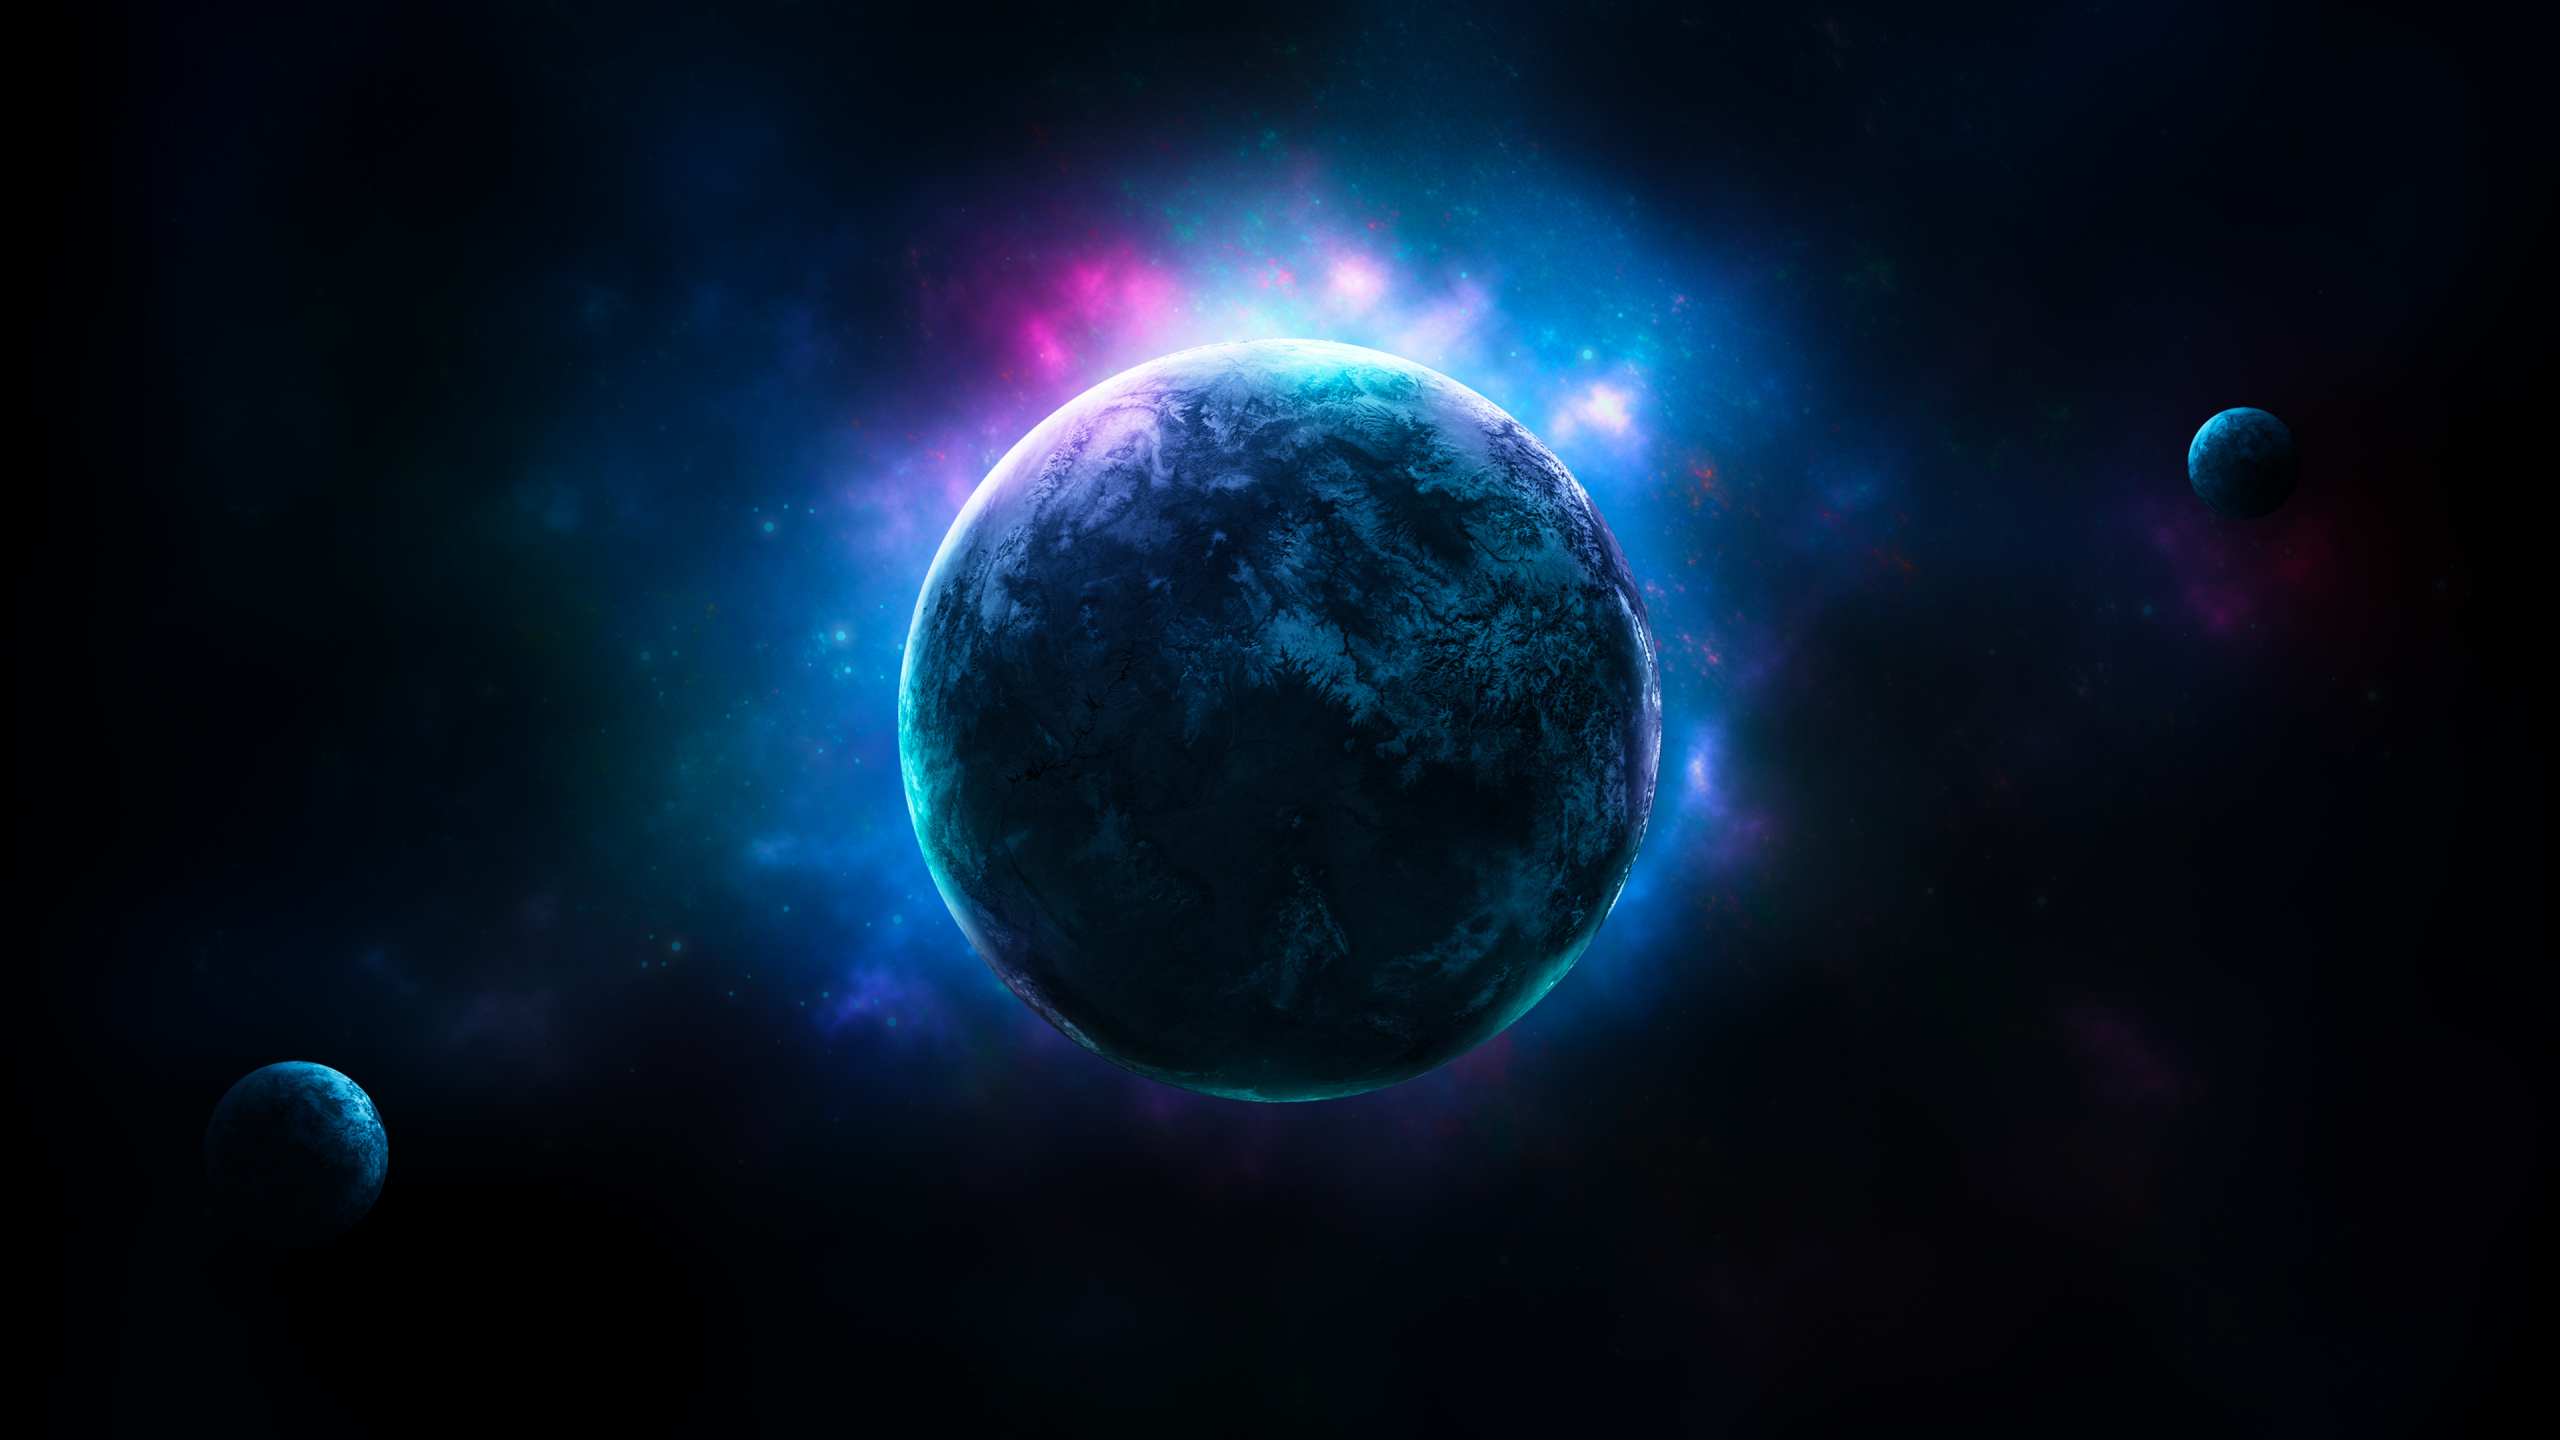 Download wallpapers planet in space, art, space bodies, dark planet, solar  system, blue light for desktop free. Pictures for desktop free